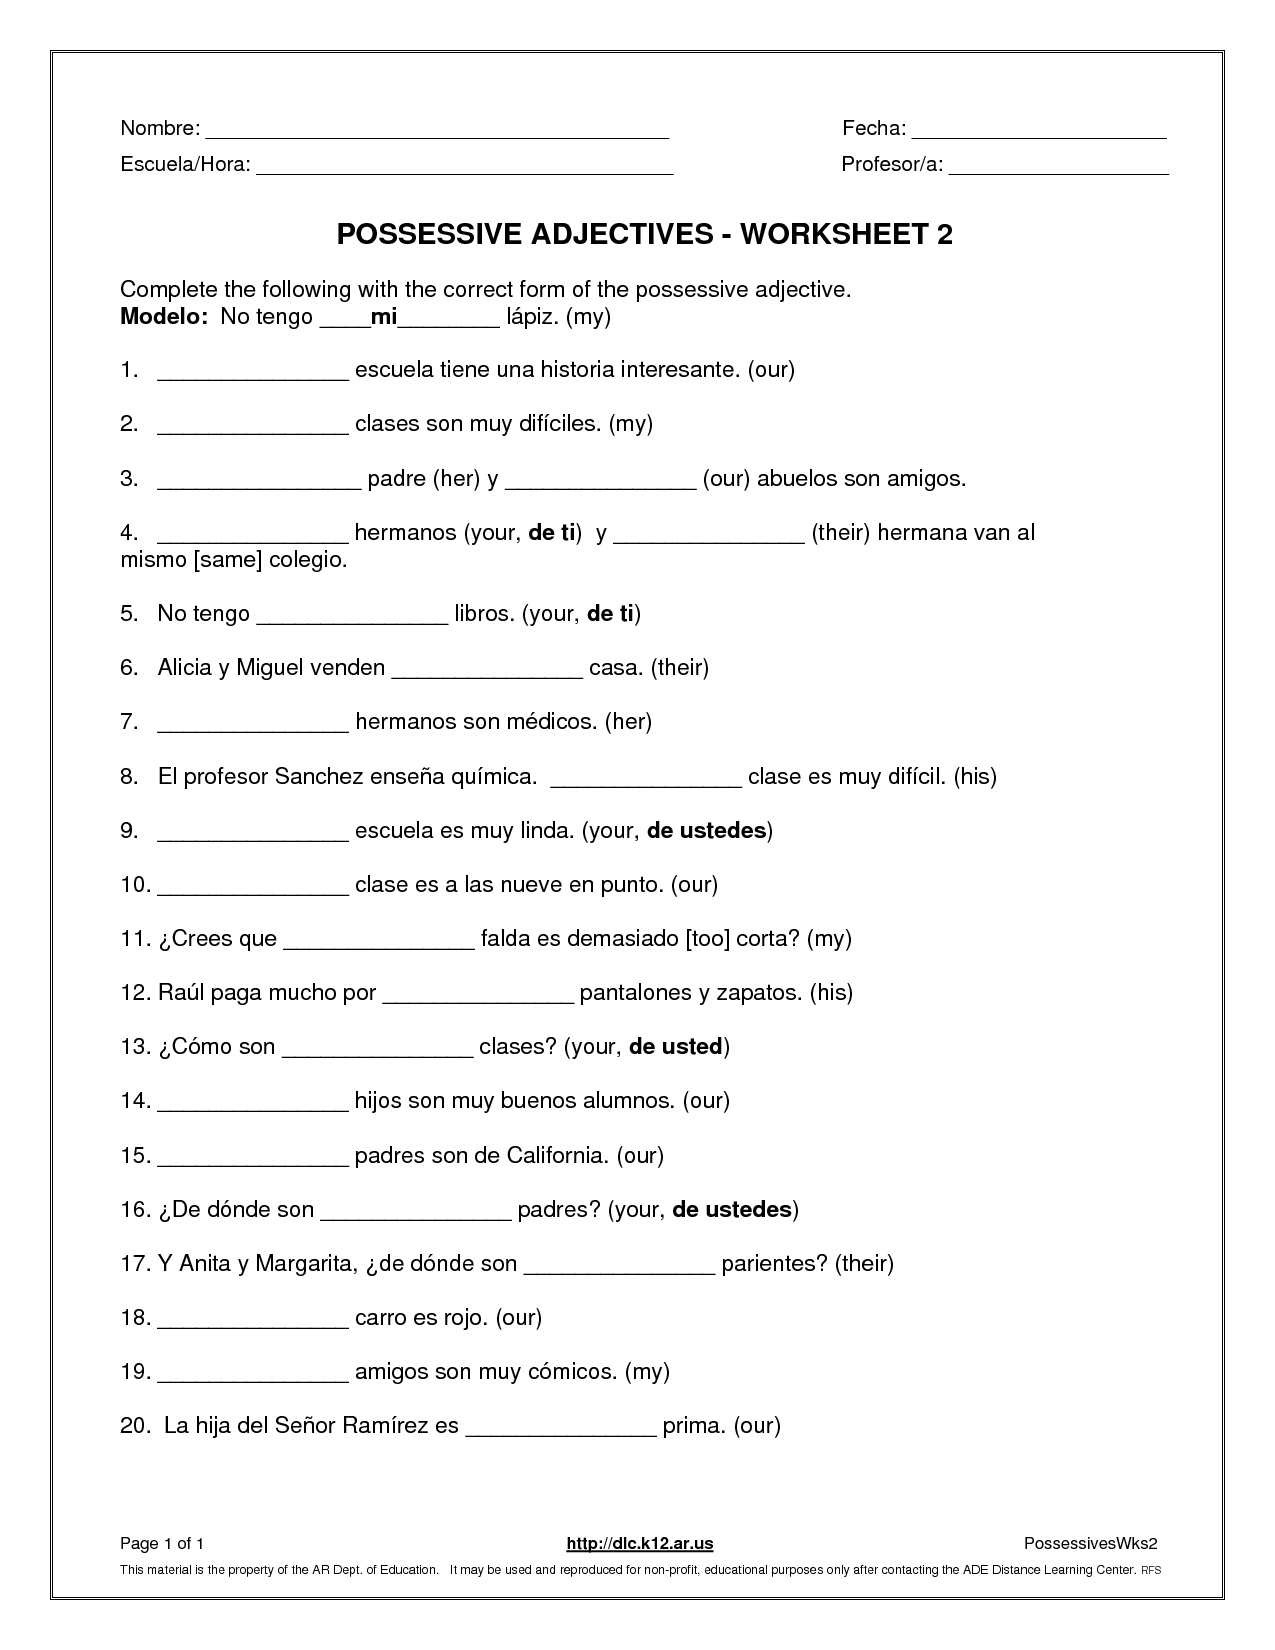 agreement-of-adjectives-spanish-worksheet-answers-db-excel